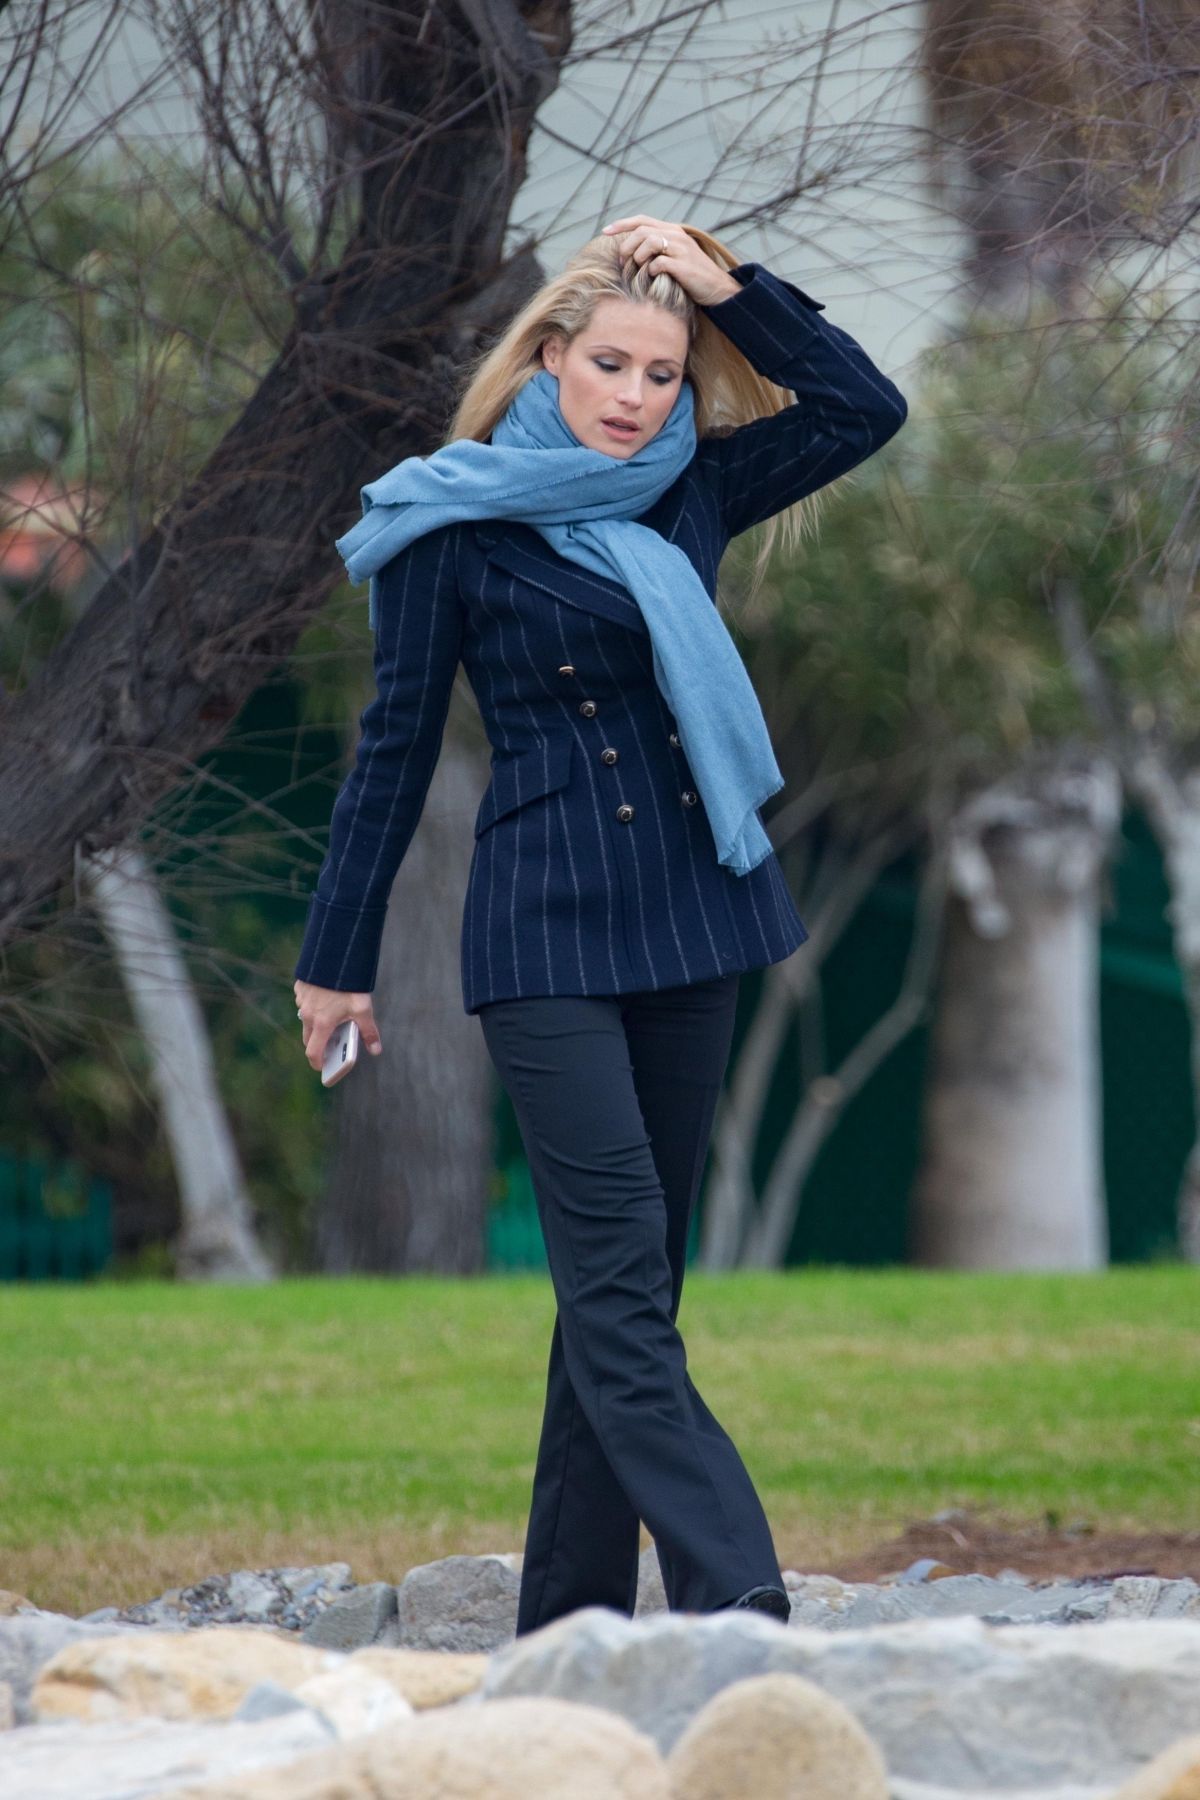 michelle-hunziker-out-for-a-walk-by-the-sea-in-sanremo-01-30-2018-14.jpg